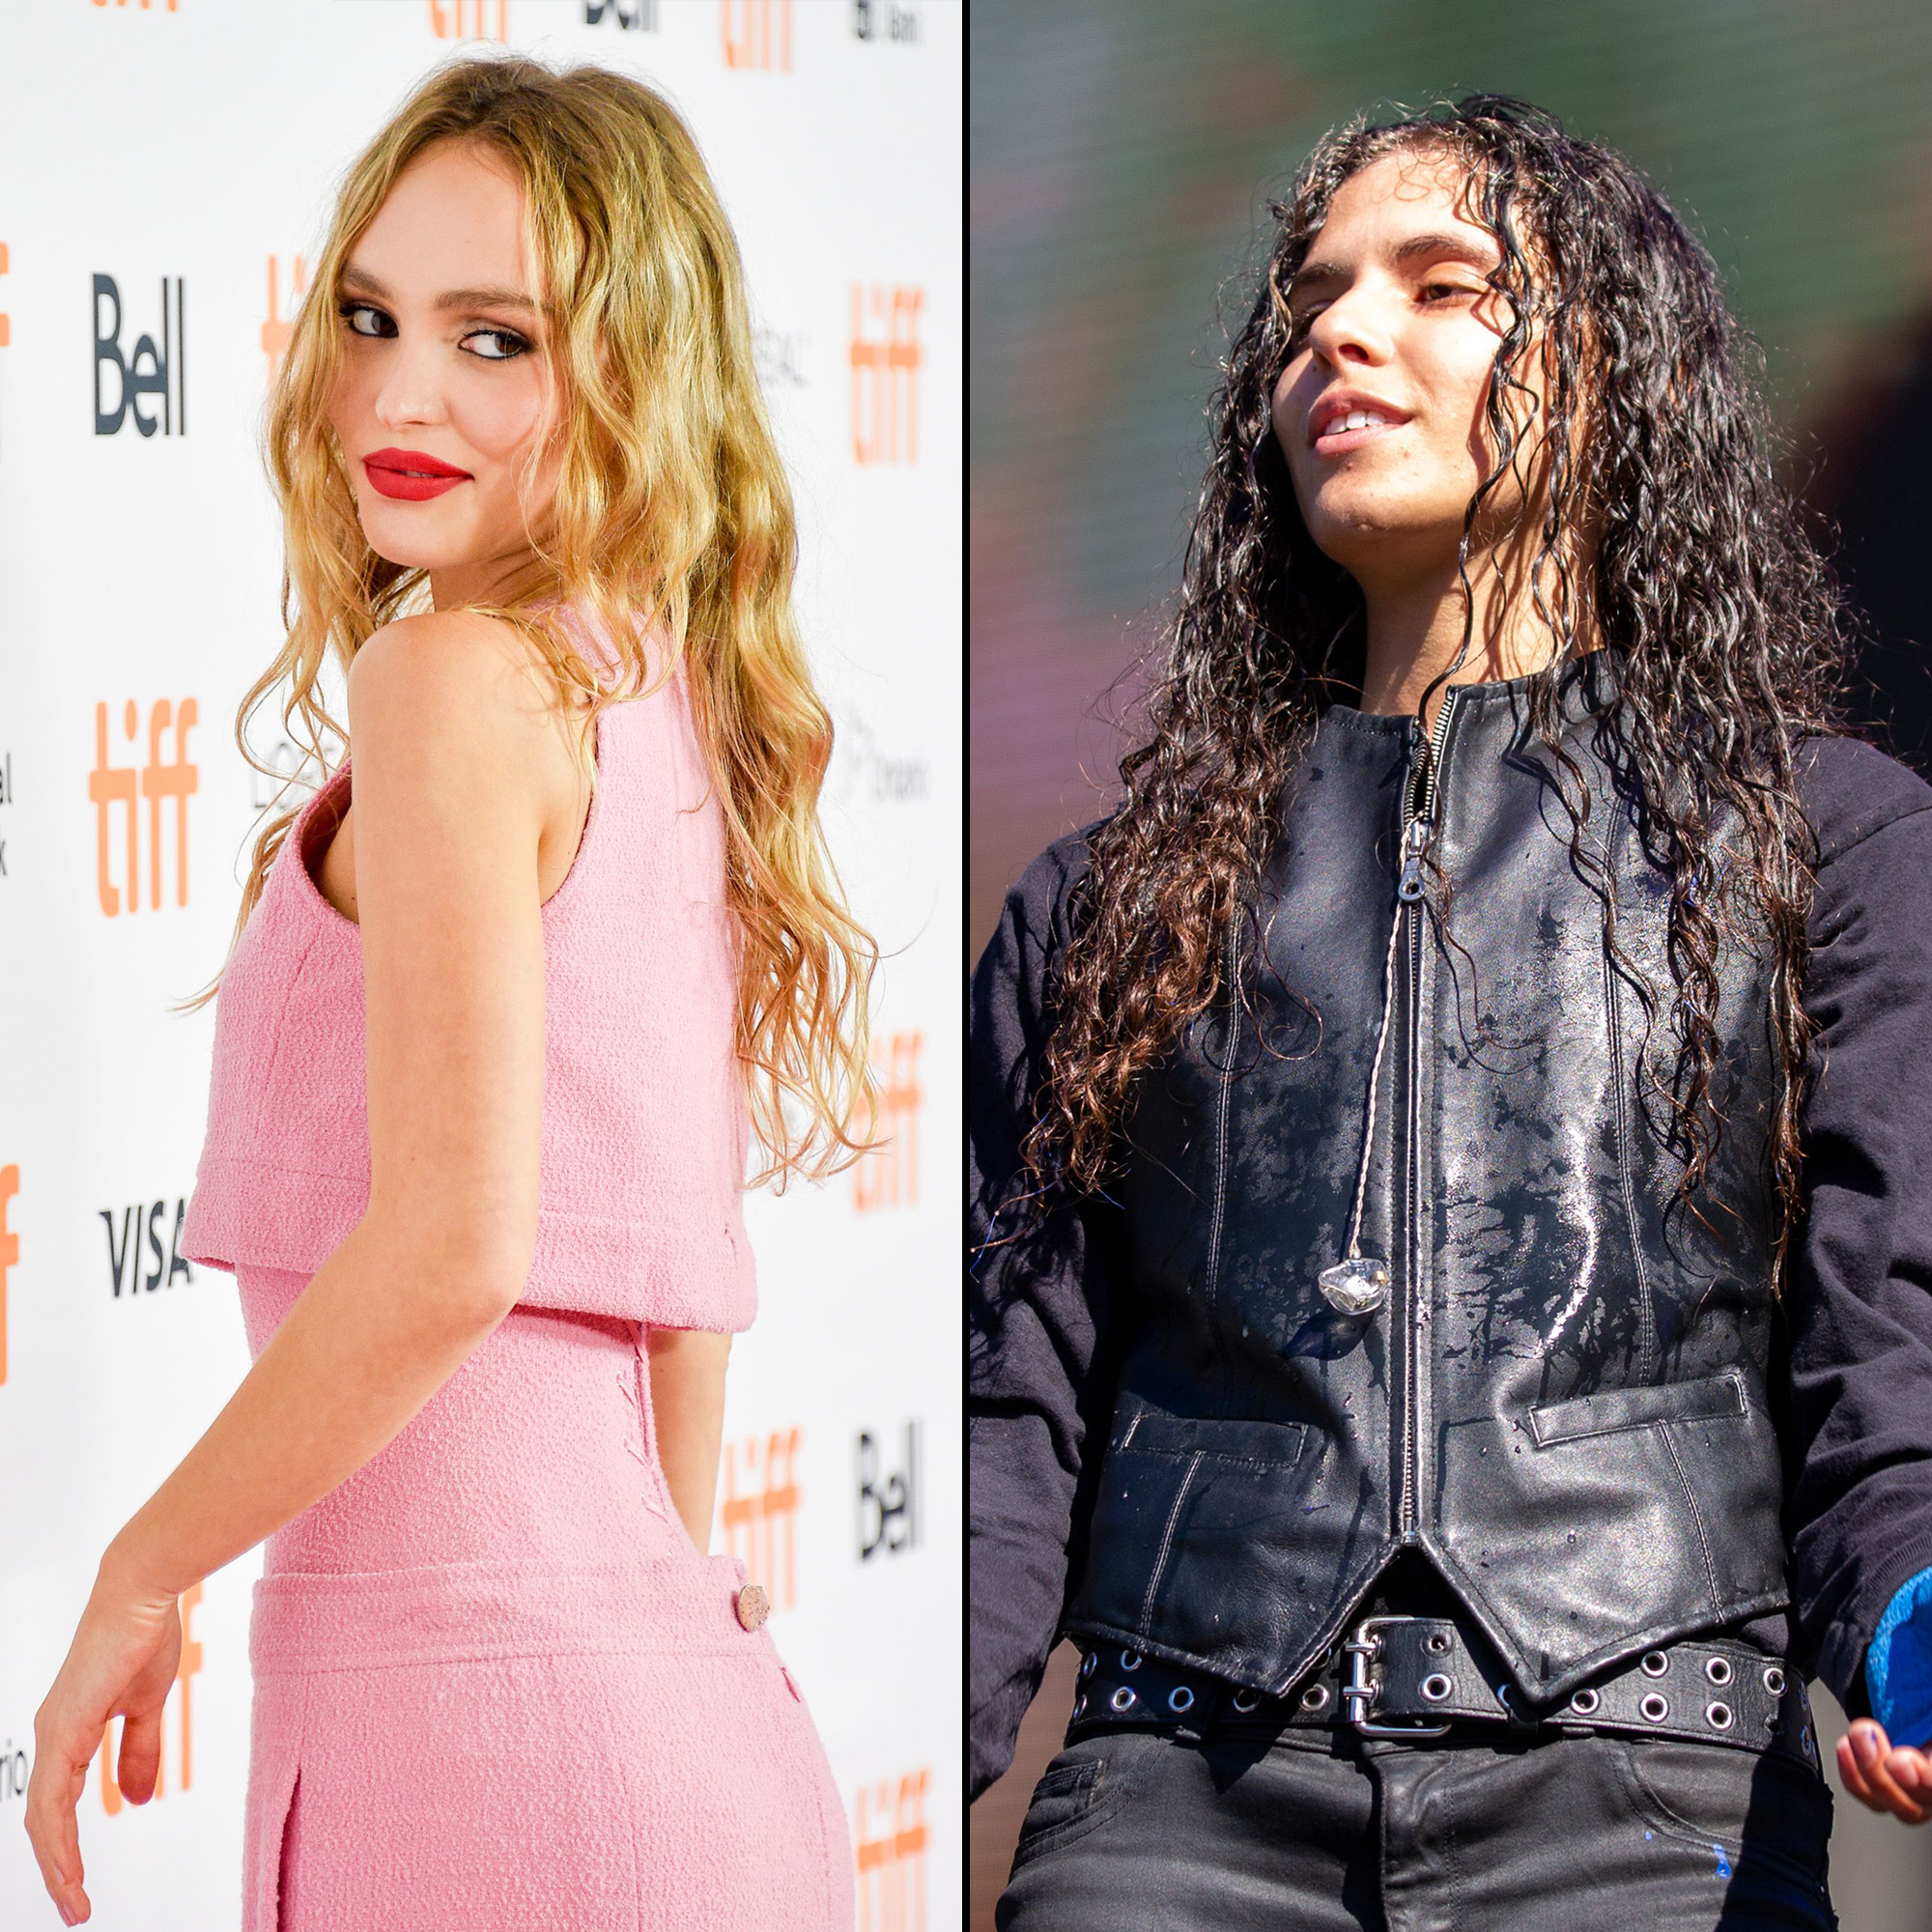 Lily-Rose Depp Confirms 070 Shake Romance With Kissing picture